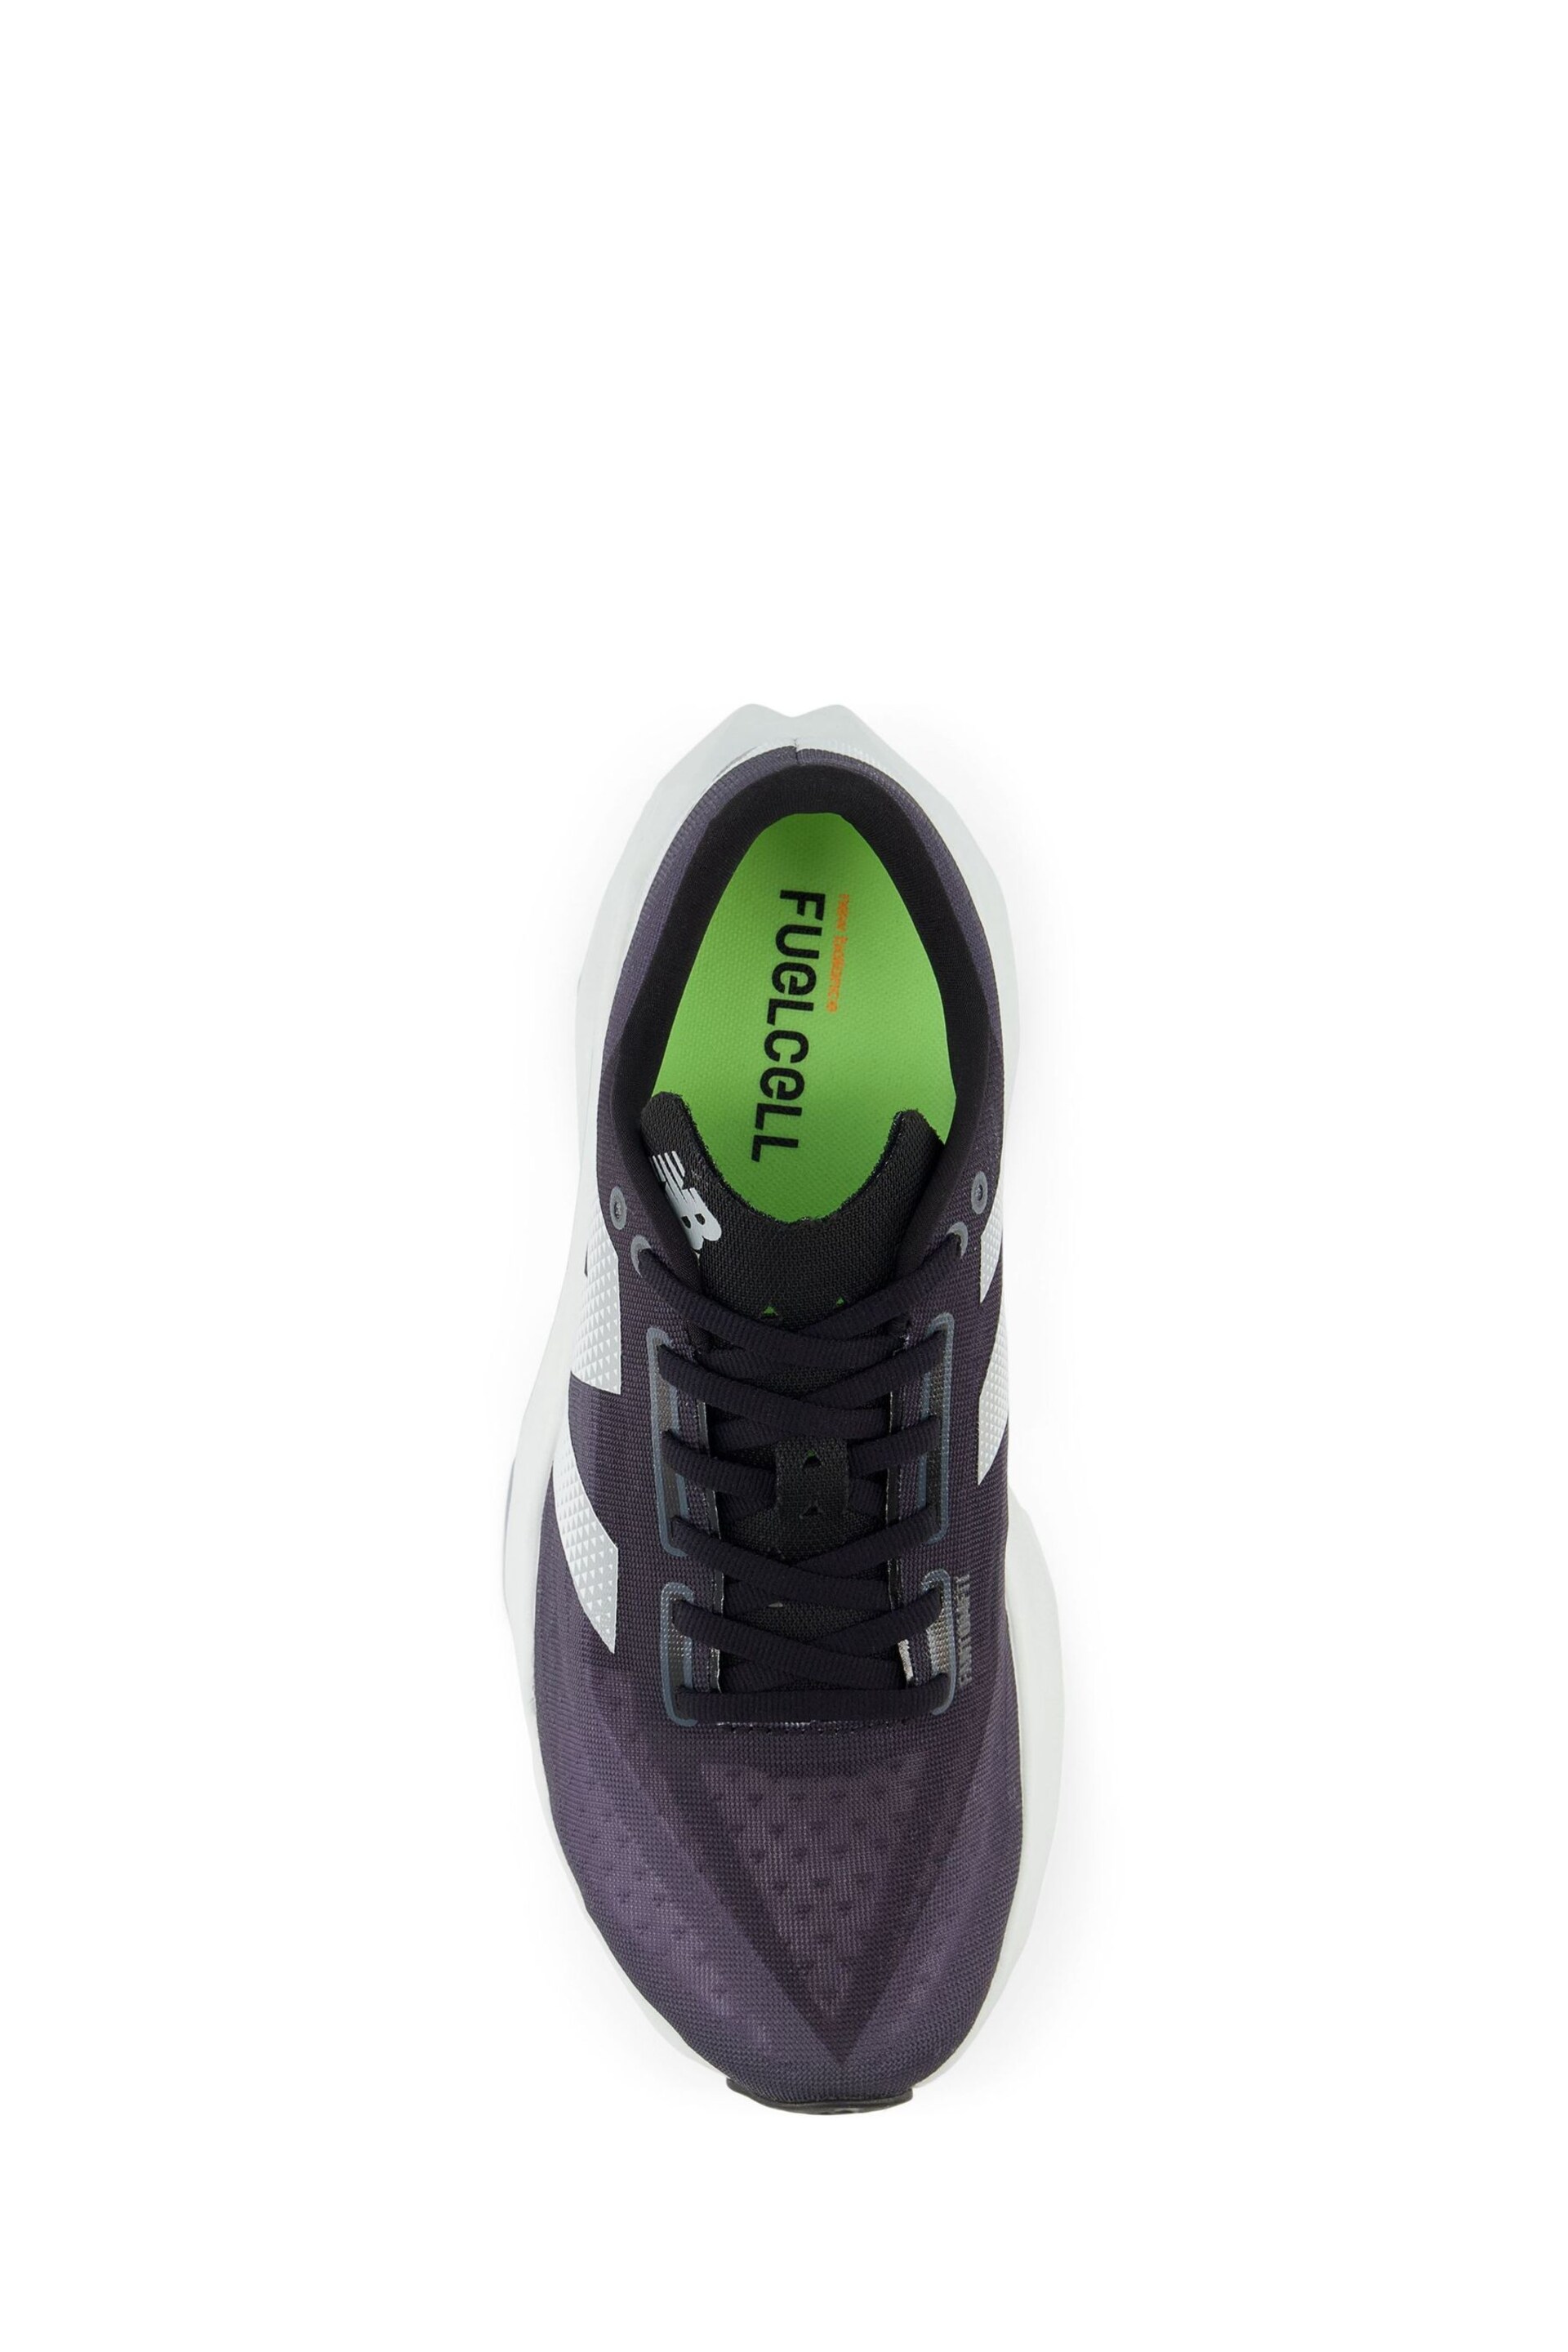 New Balance Grey Mens Fuelcell Rebel Trainers - Image 10 of 12